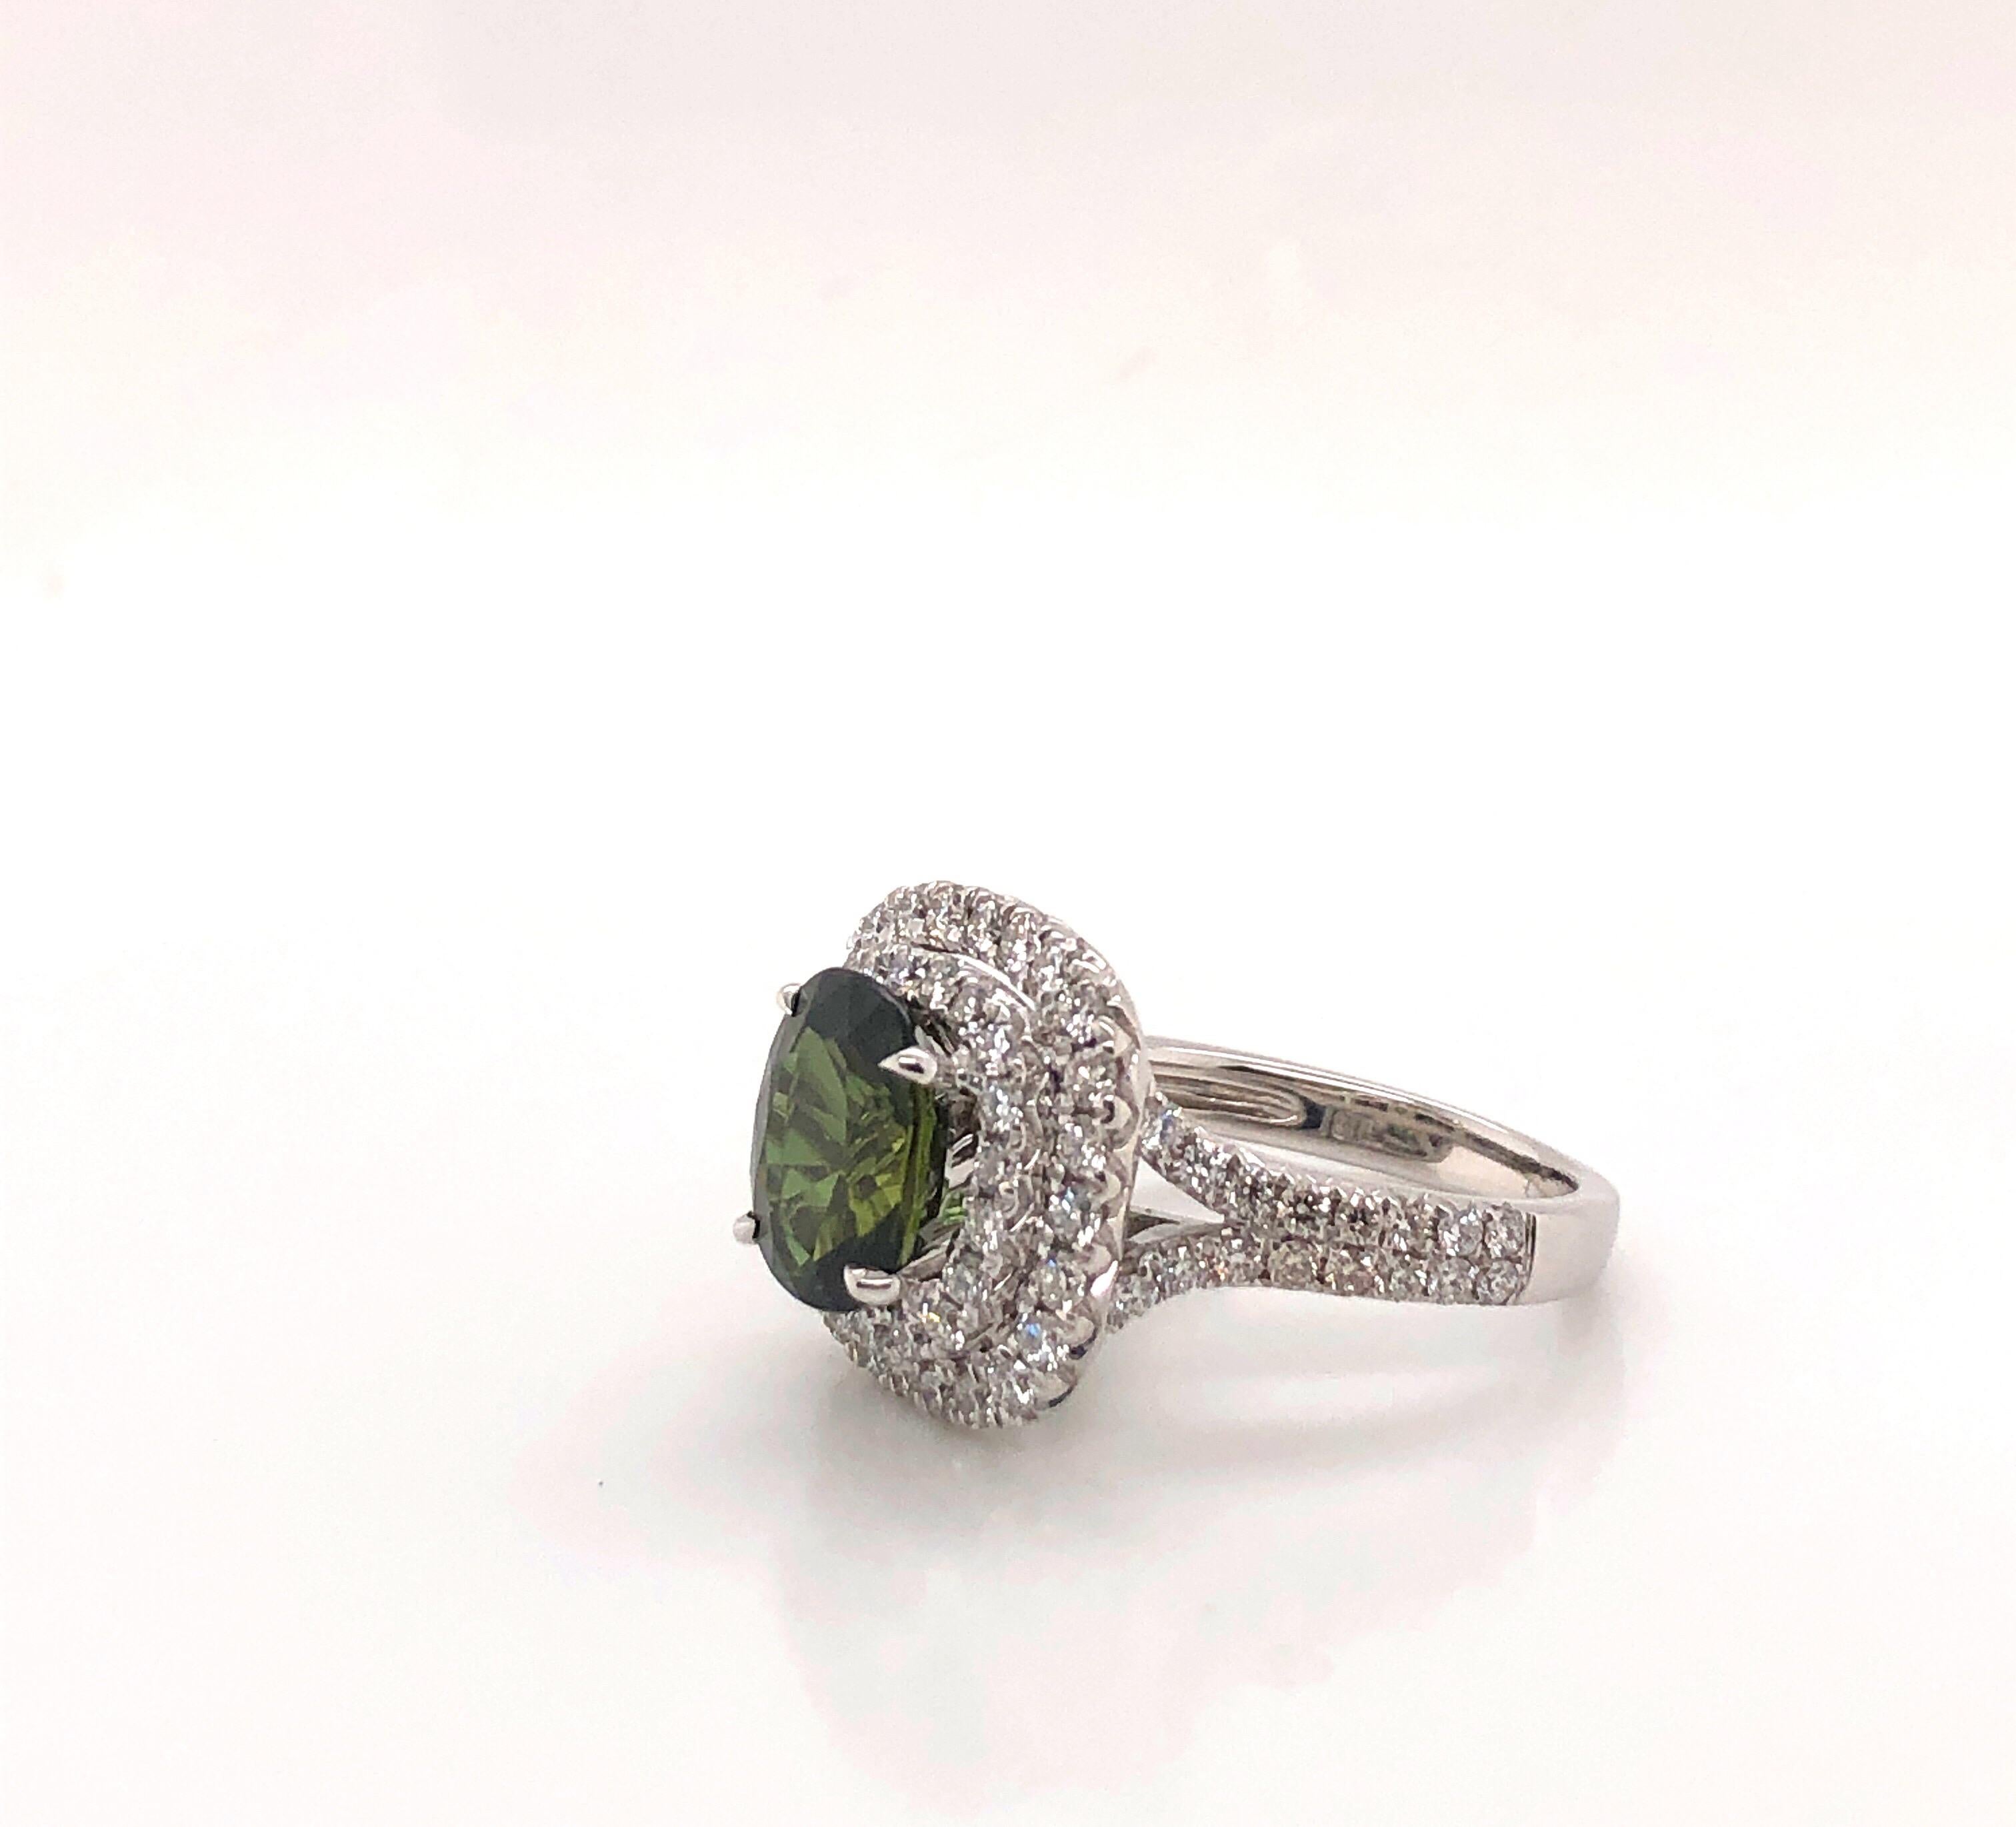 3.12 Carat Green Cushion Cut Sapphire 'GIA Lab Report' in an 18K Diamond Ring For Sale 1